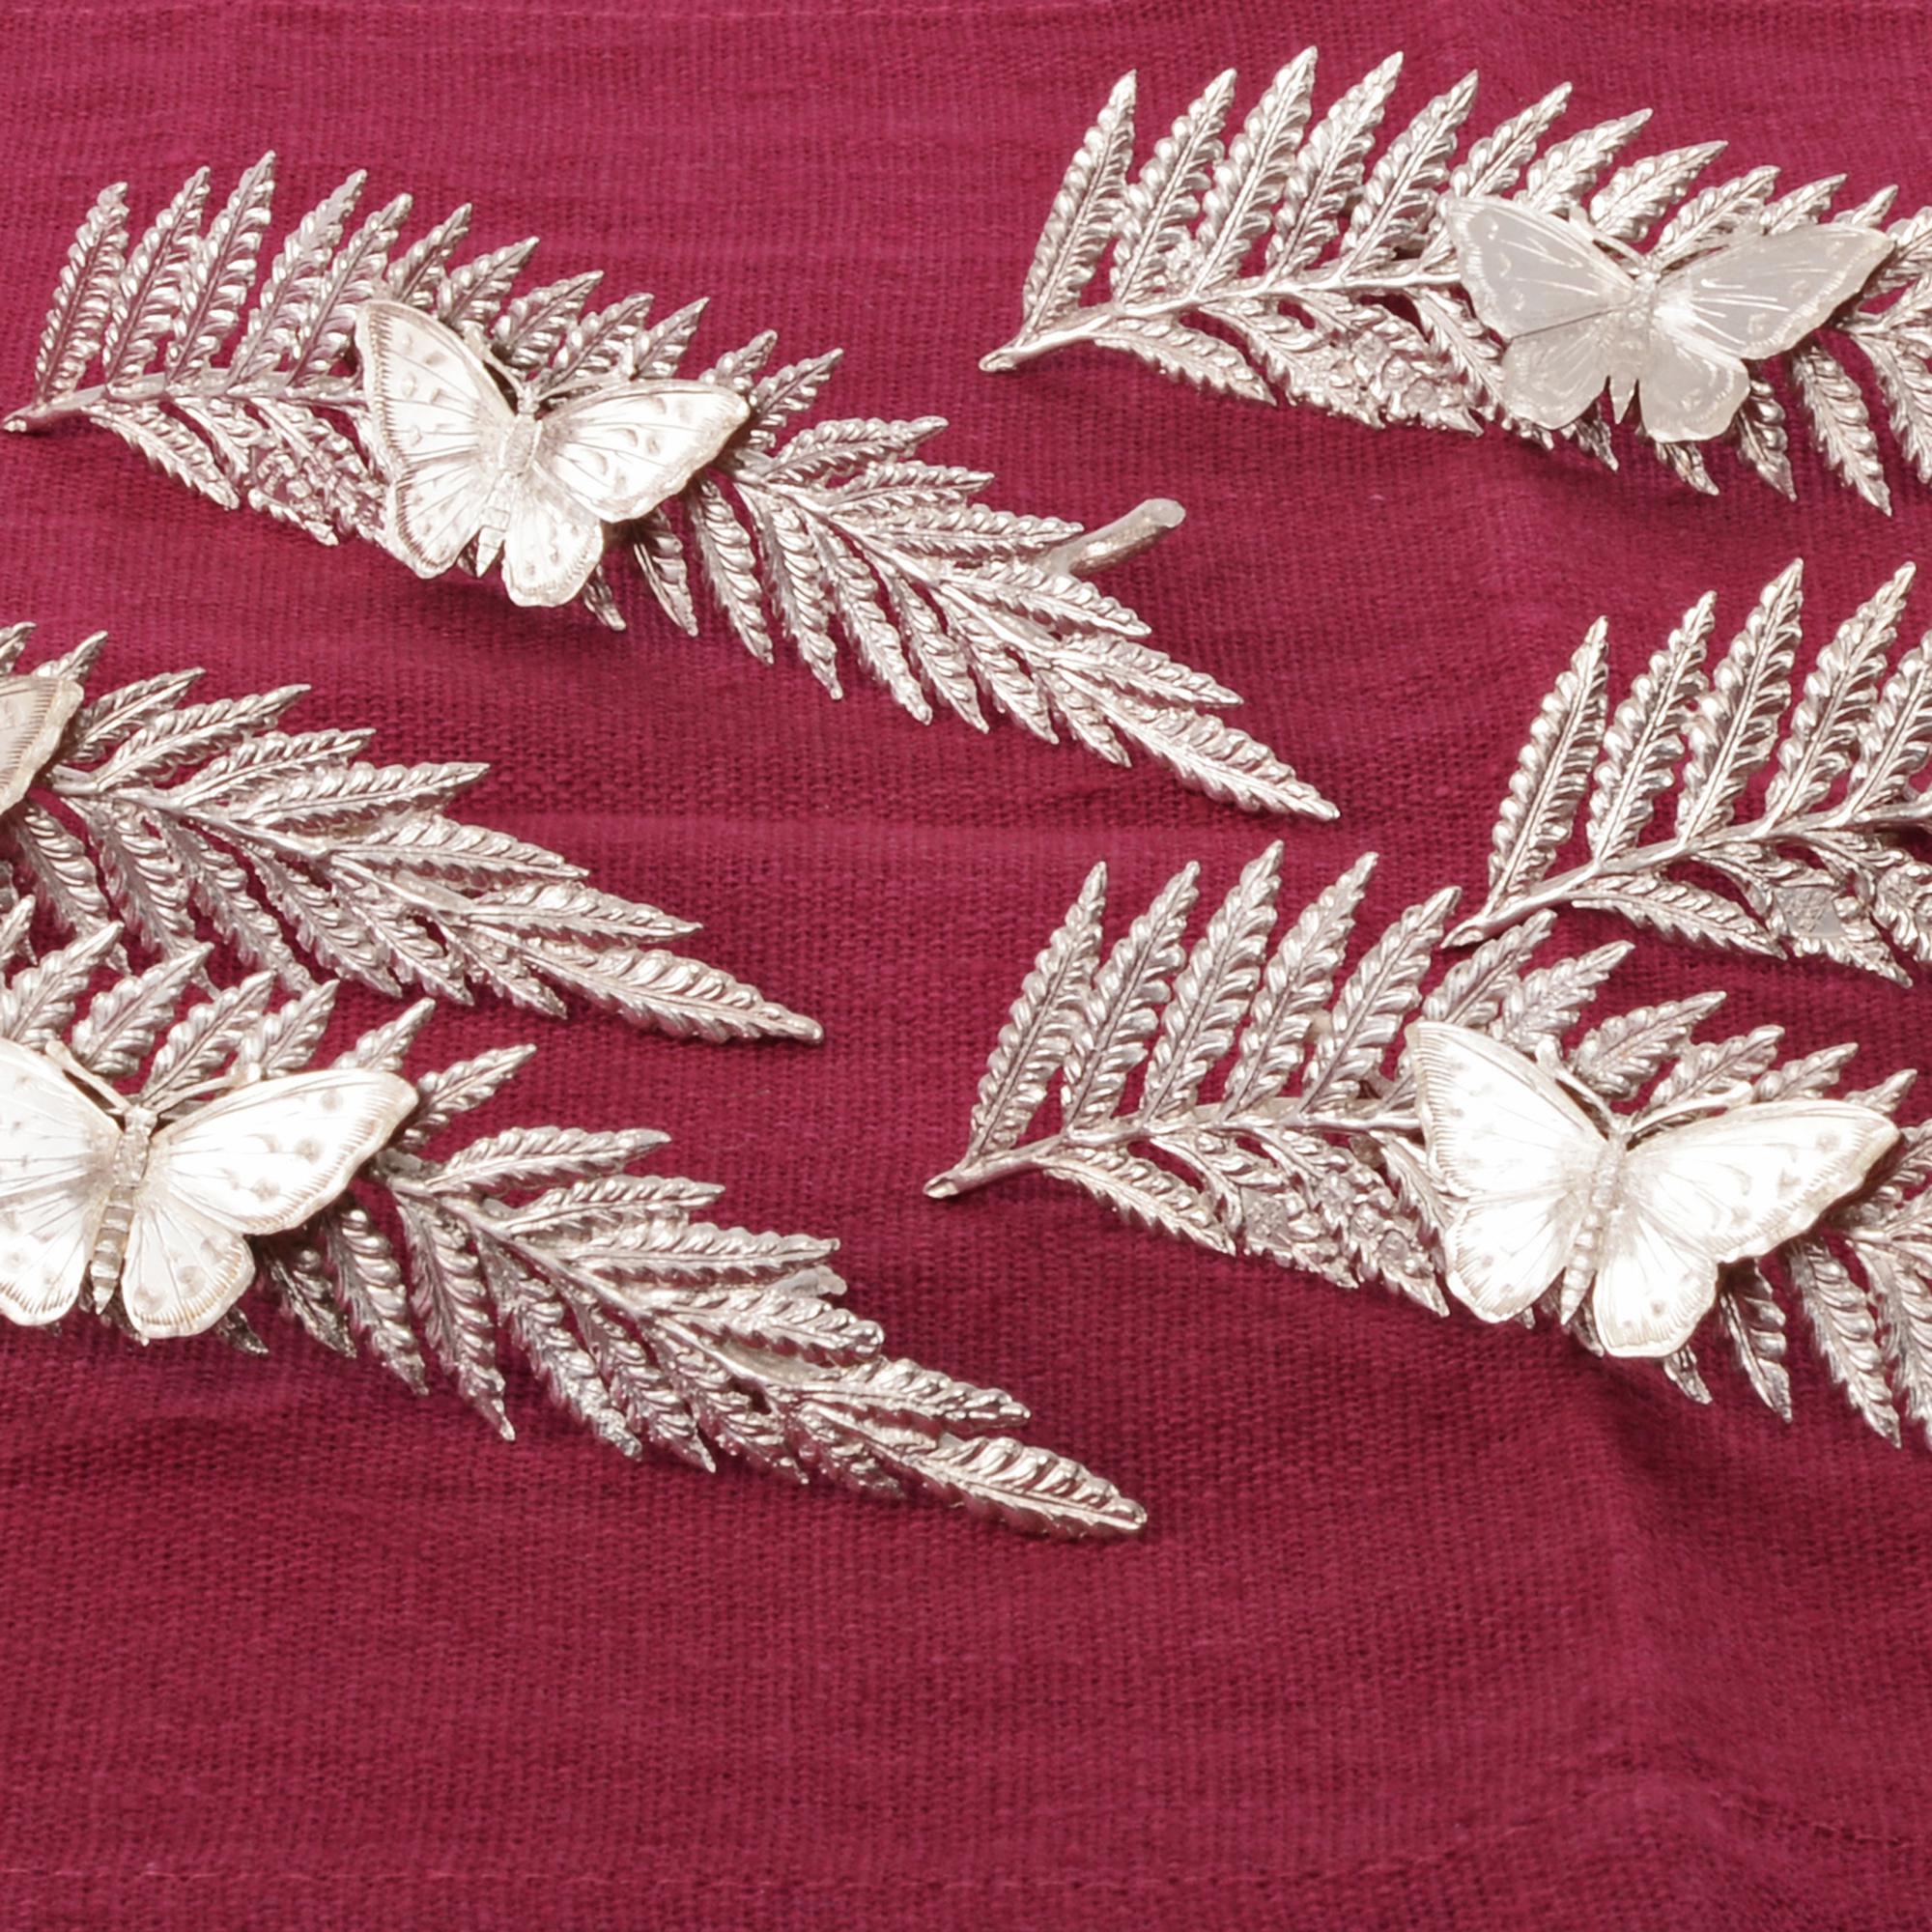 Highly unusual set of antique sterling silver menu holders or place card holders, each beautifully modelled as a fern leaf with a butterfly resting on the leaf. The butterflies act as sprung clips to hold the menu or card in place and are cleverly